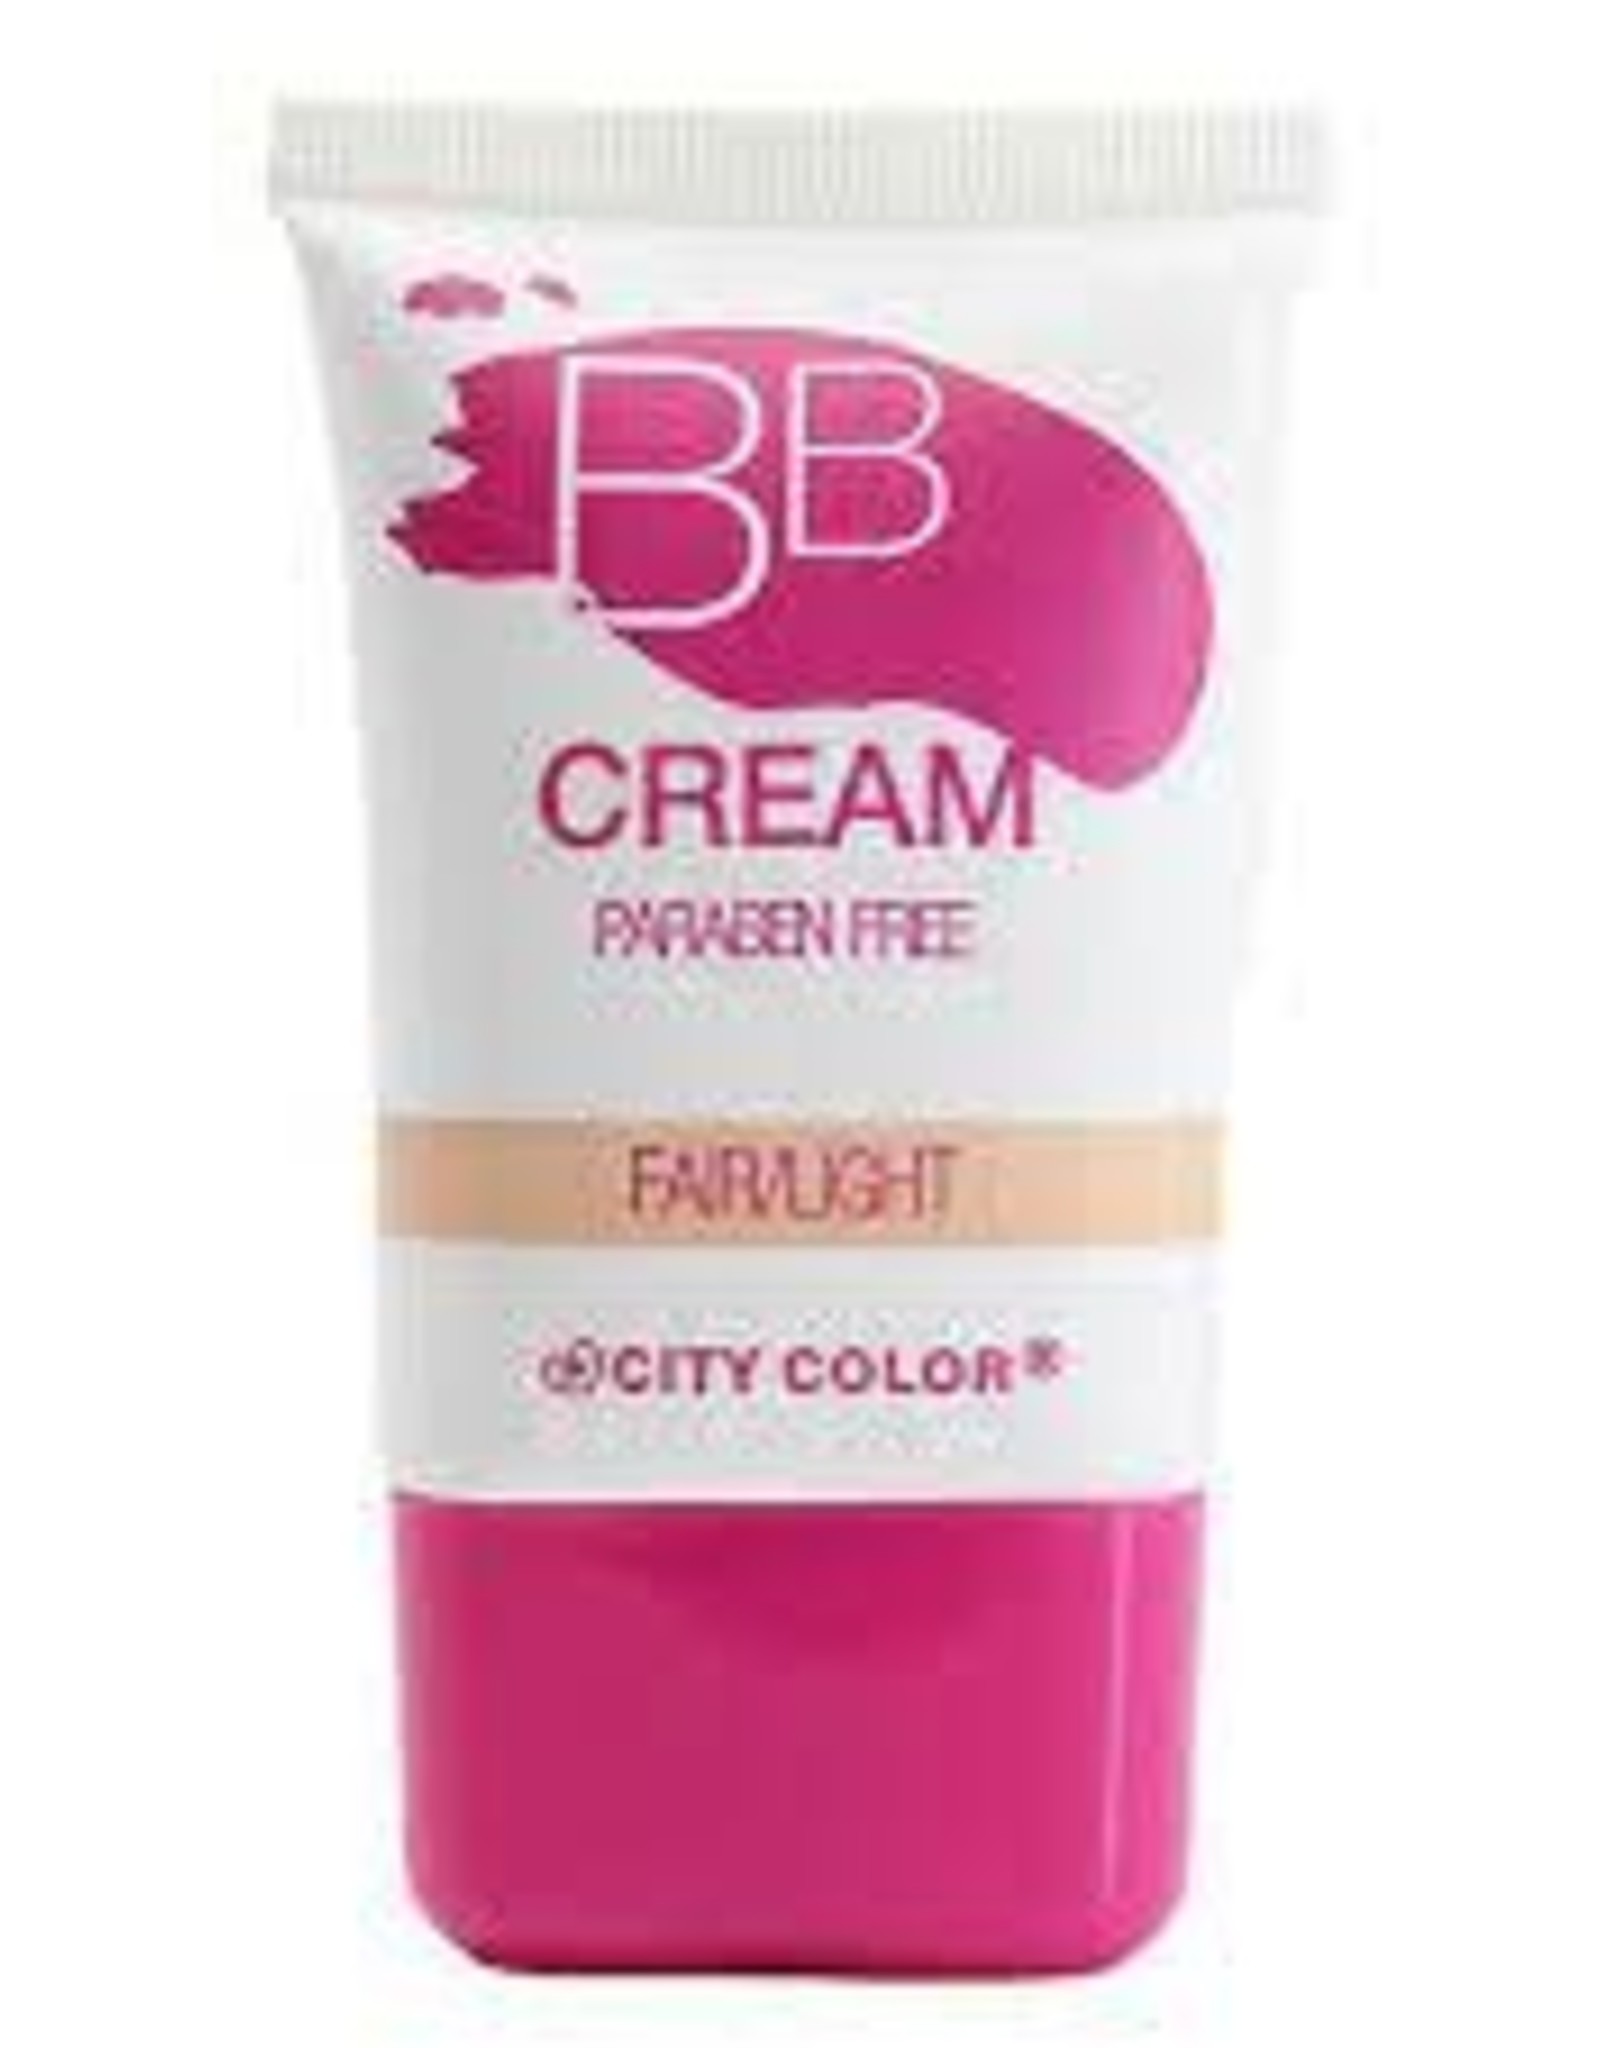 BB Cream by City Color